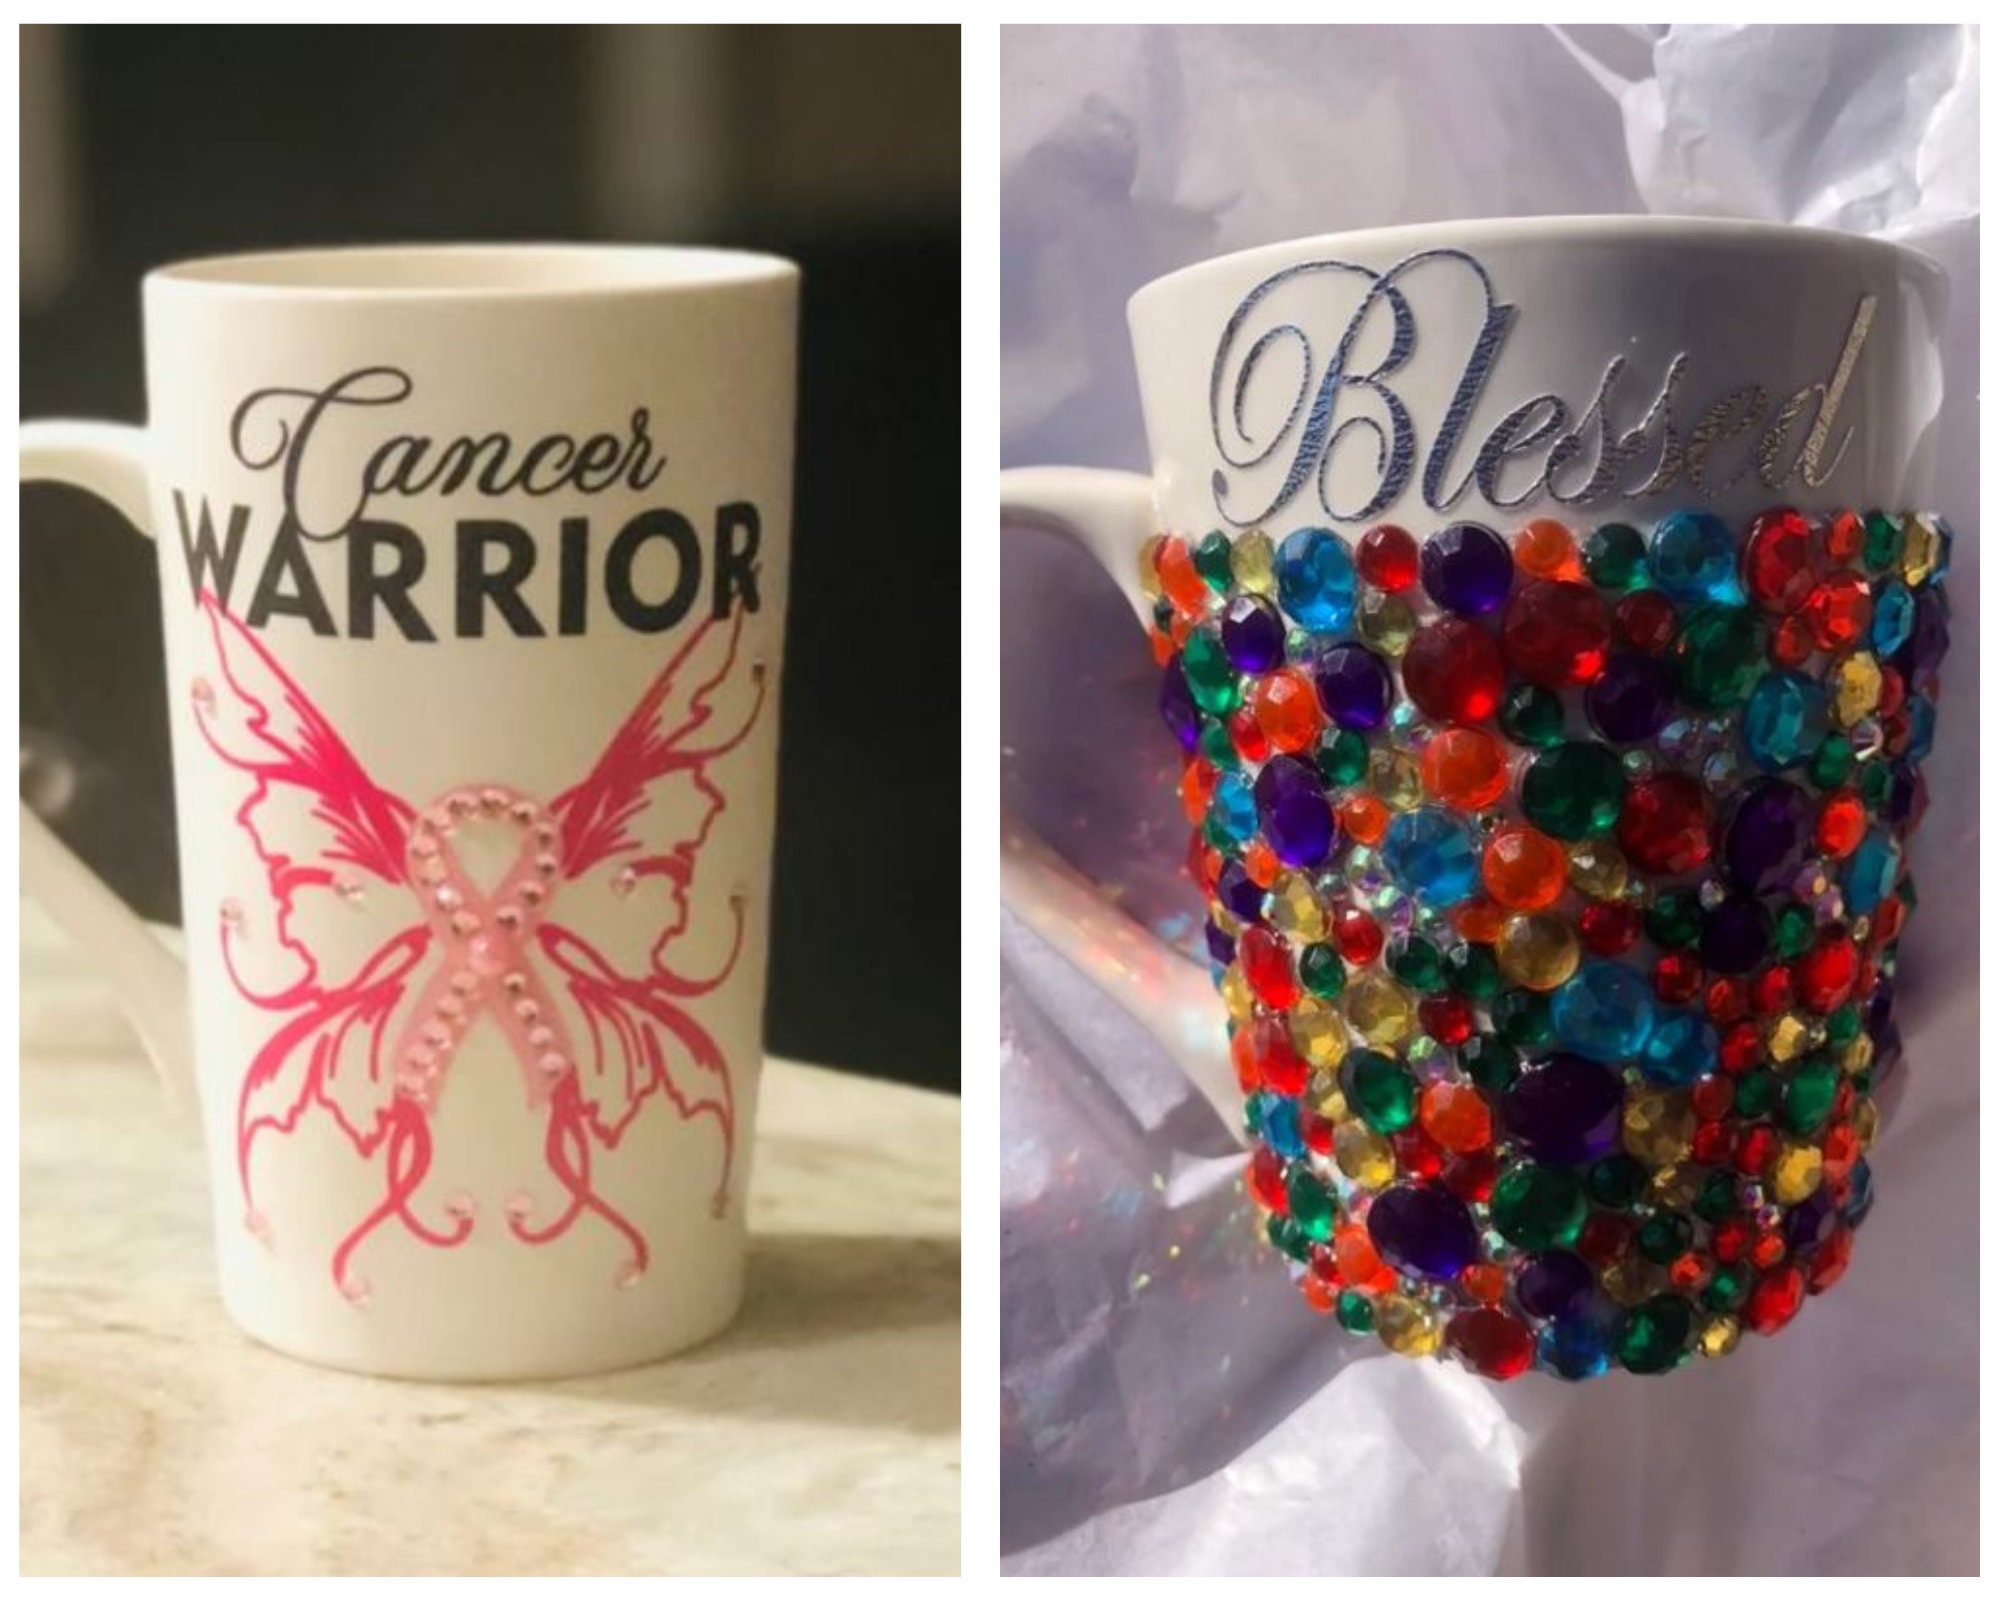 CLEARANCE ITEMS All Things Must Go Discounted Overstock Merchandise One of  a Kind Sale Items Deep Discounts  Bling Cups Tumblers 